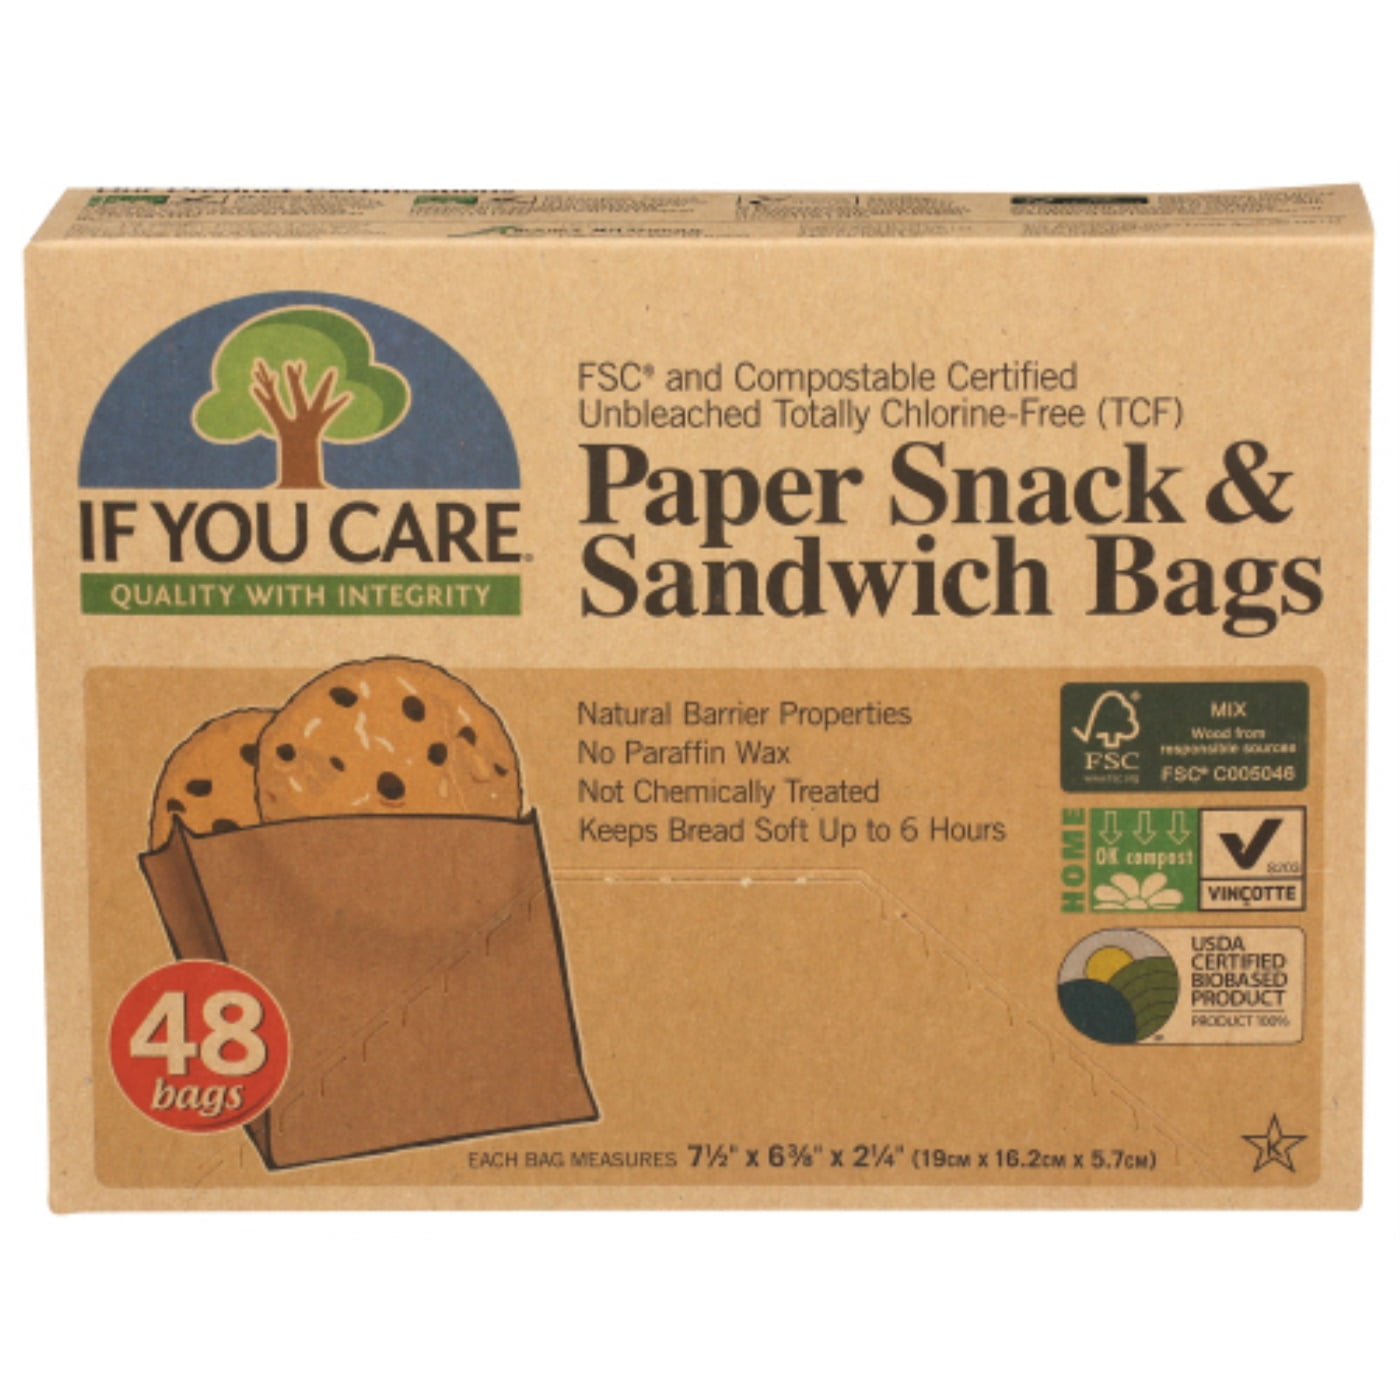 If You Care Paper Snack & Sandwich Bags 